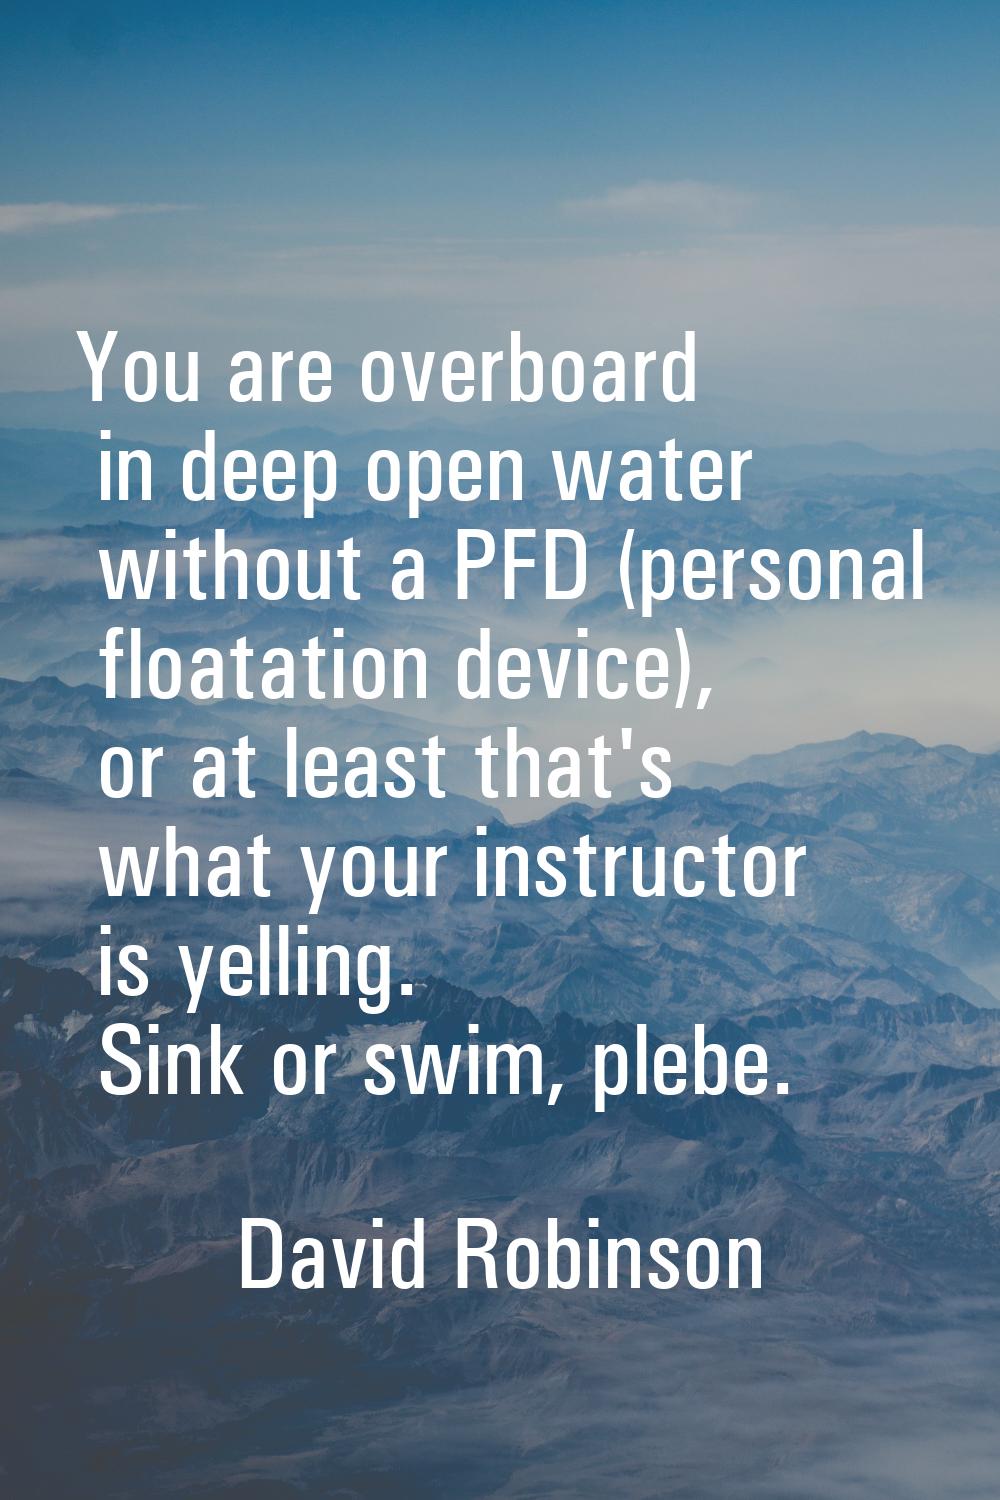 You are overboard in deep open water without a PFD (personal floatation device), or at least that's